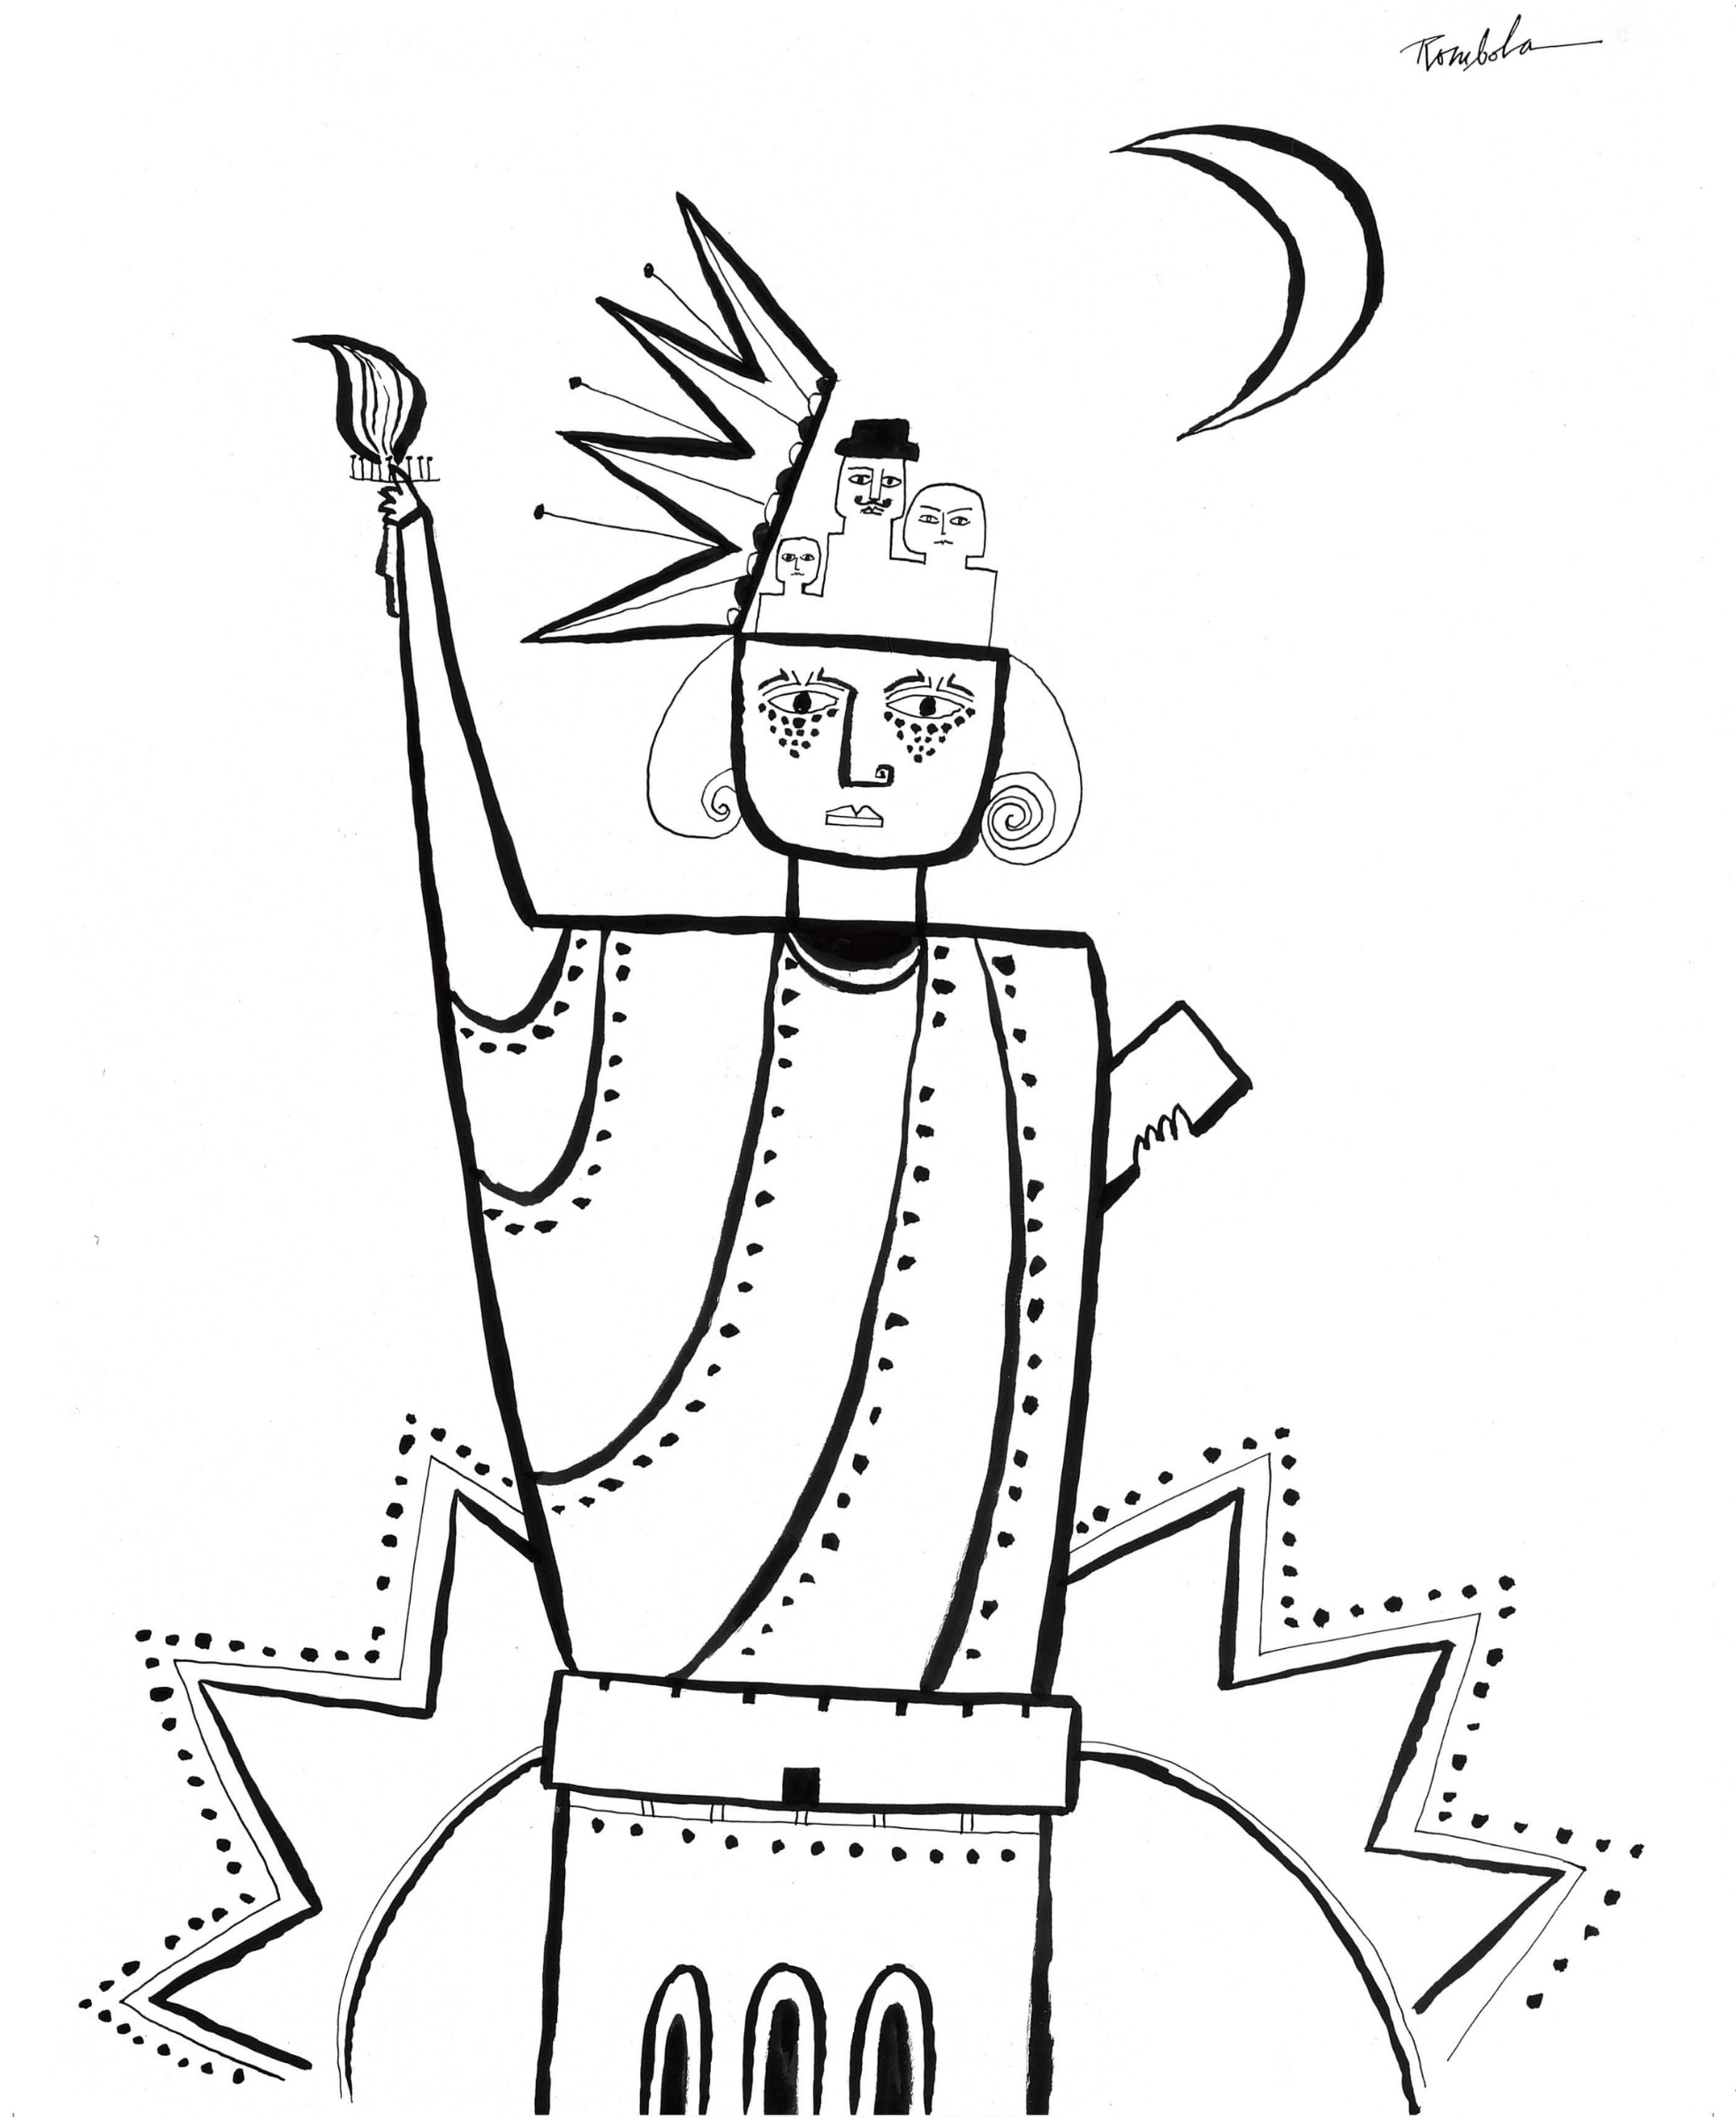   Statue of Liberty   1966 Ink on paper.  